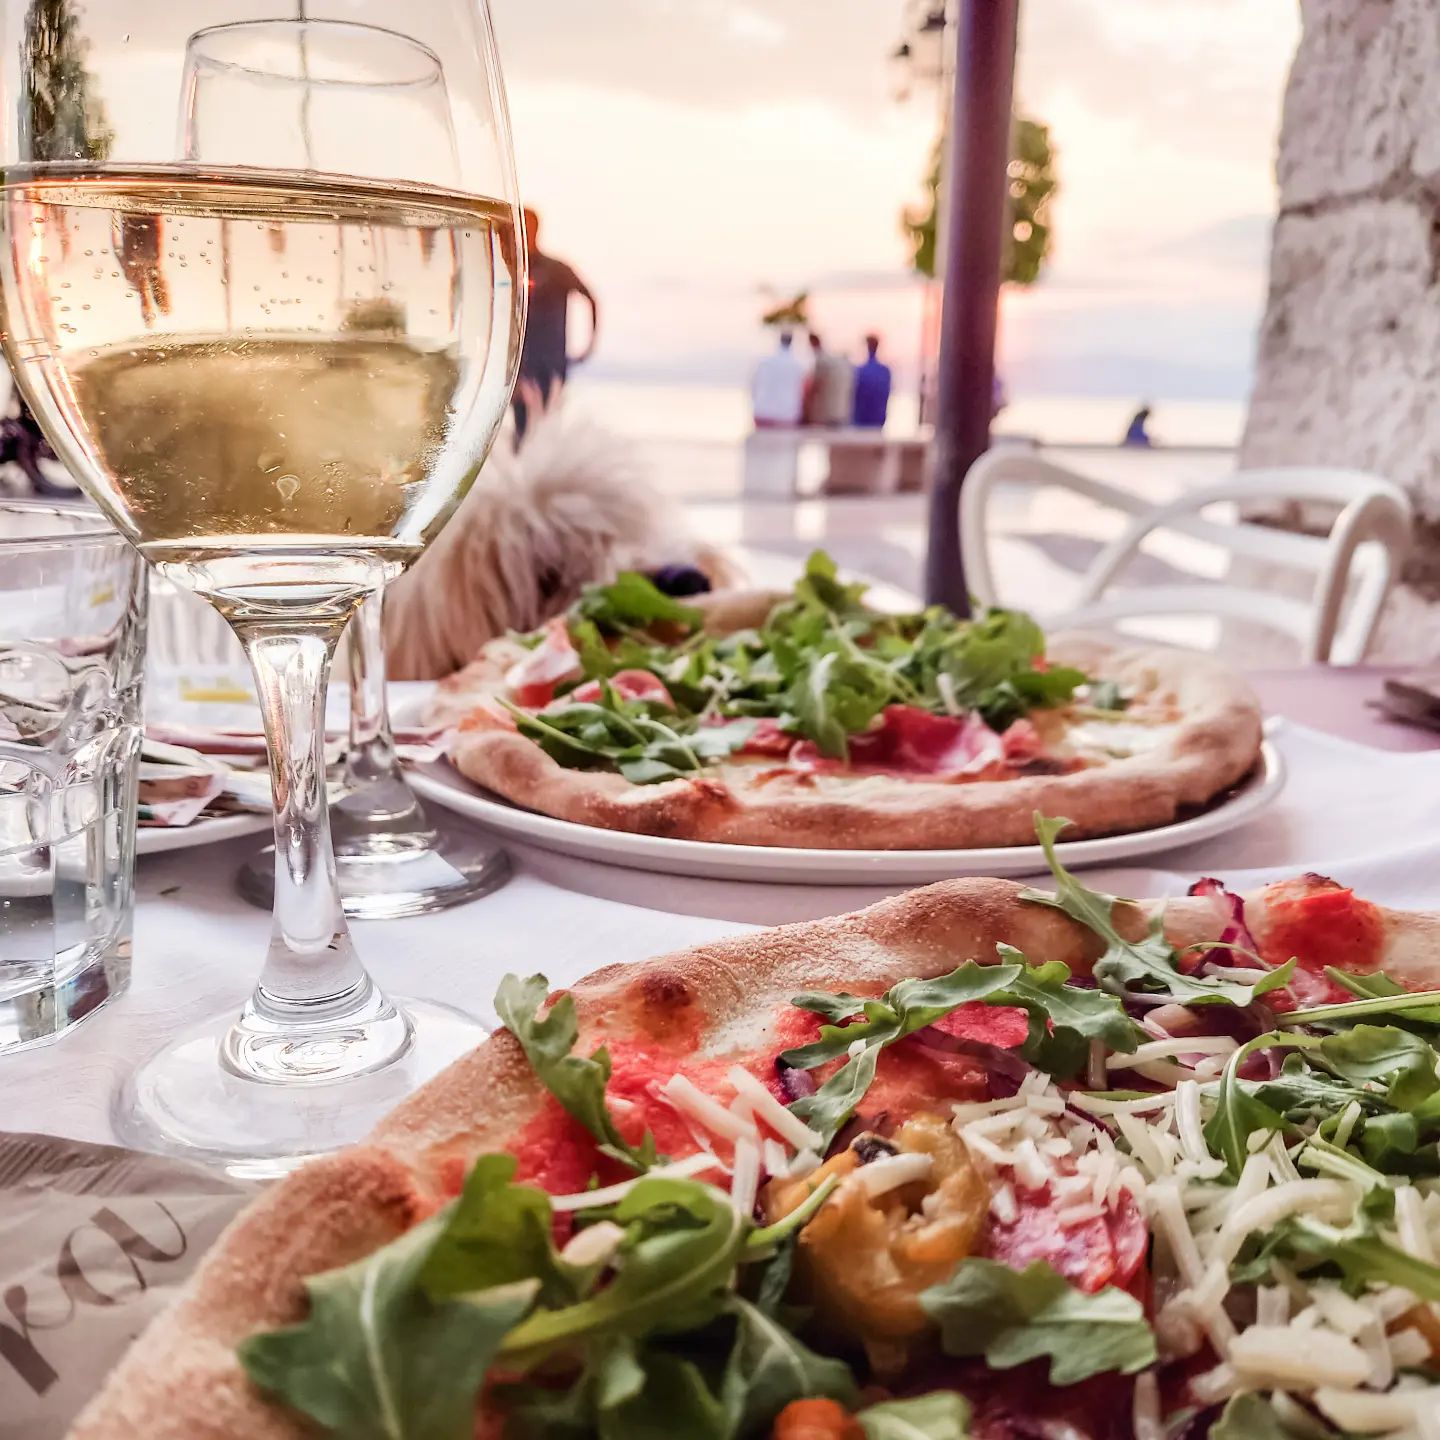 Pizza with a view 🍕🇮🇹🍷

#pizzawithaview #pizzatime #italienskmad #pizza #italien #ferietid #pizzalovers #elskerpizza